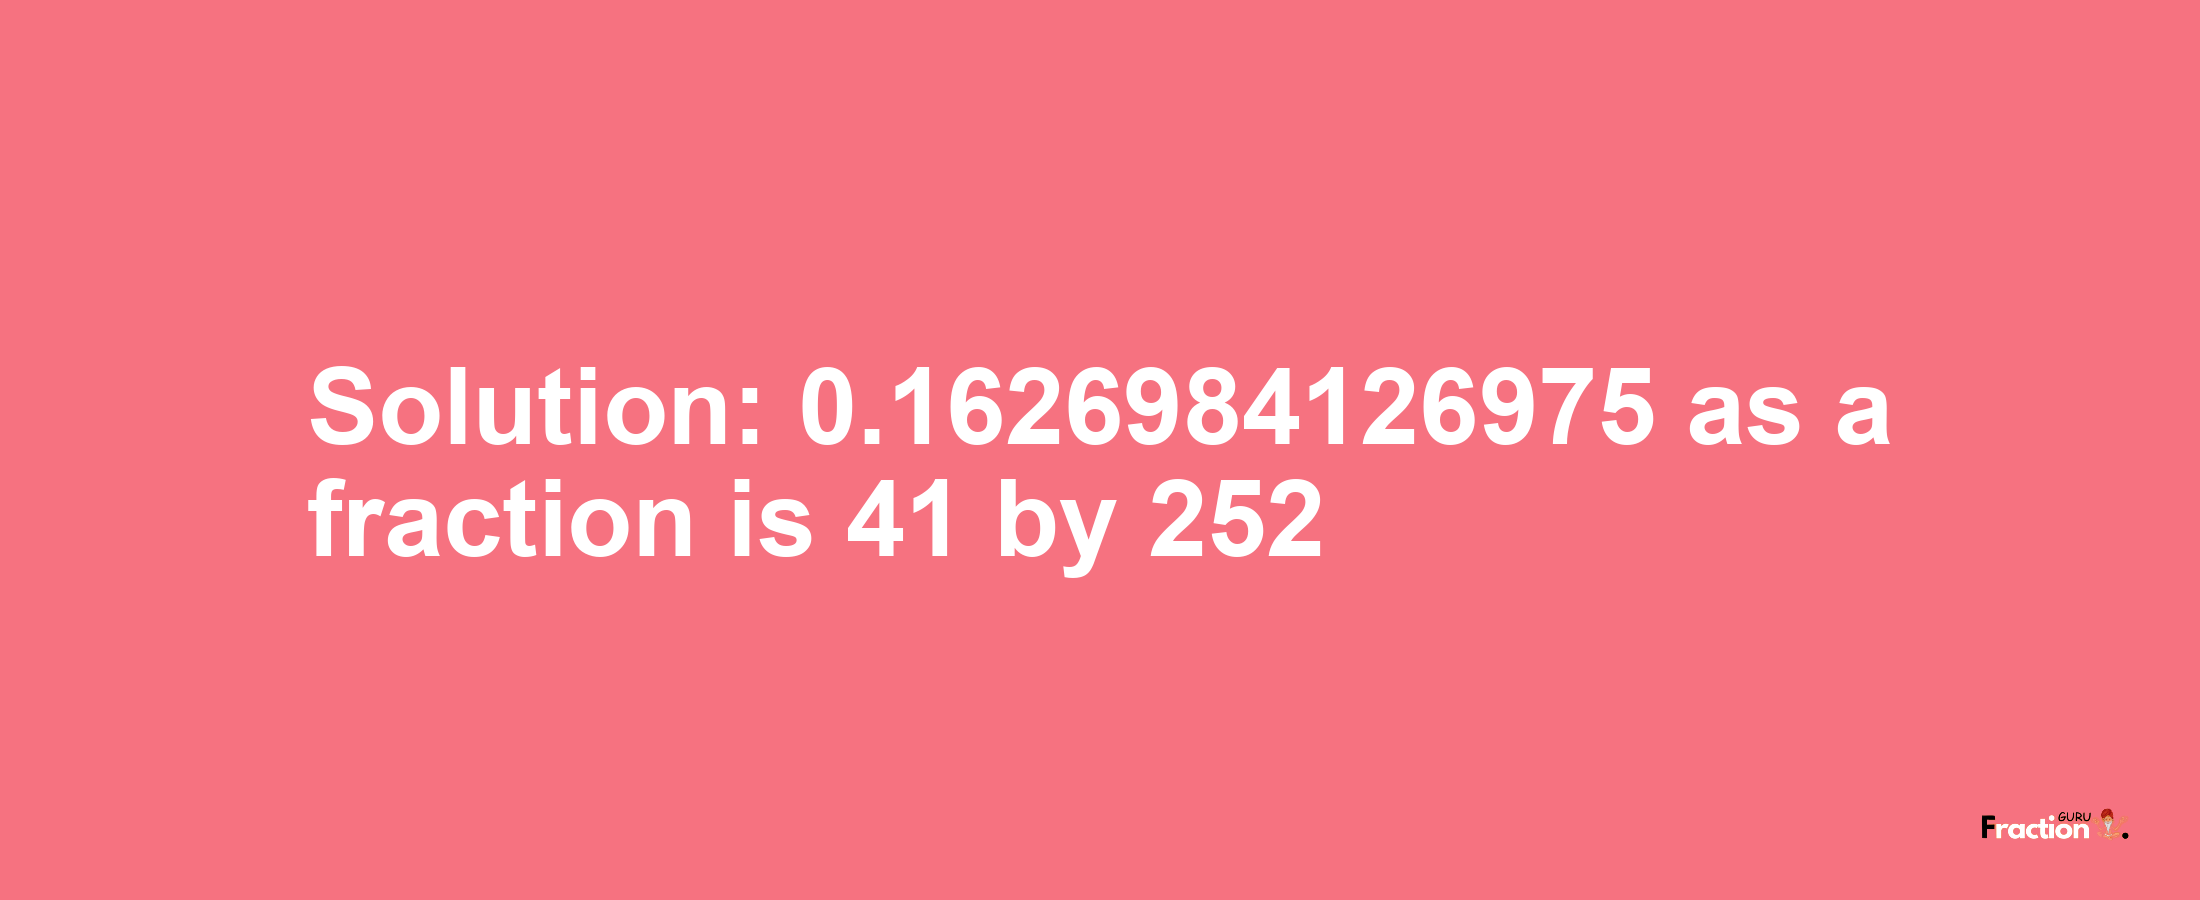 Solution:0.1626984126975 as a fraction is 41/252